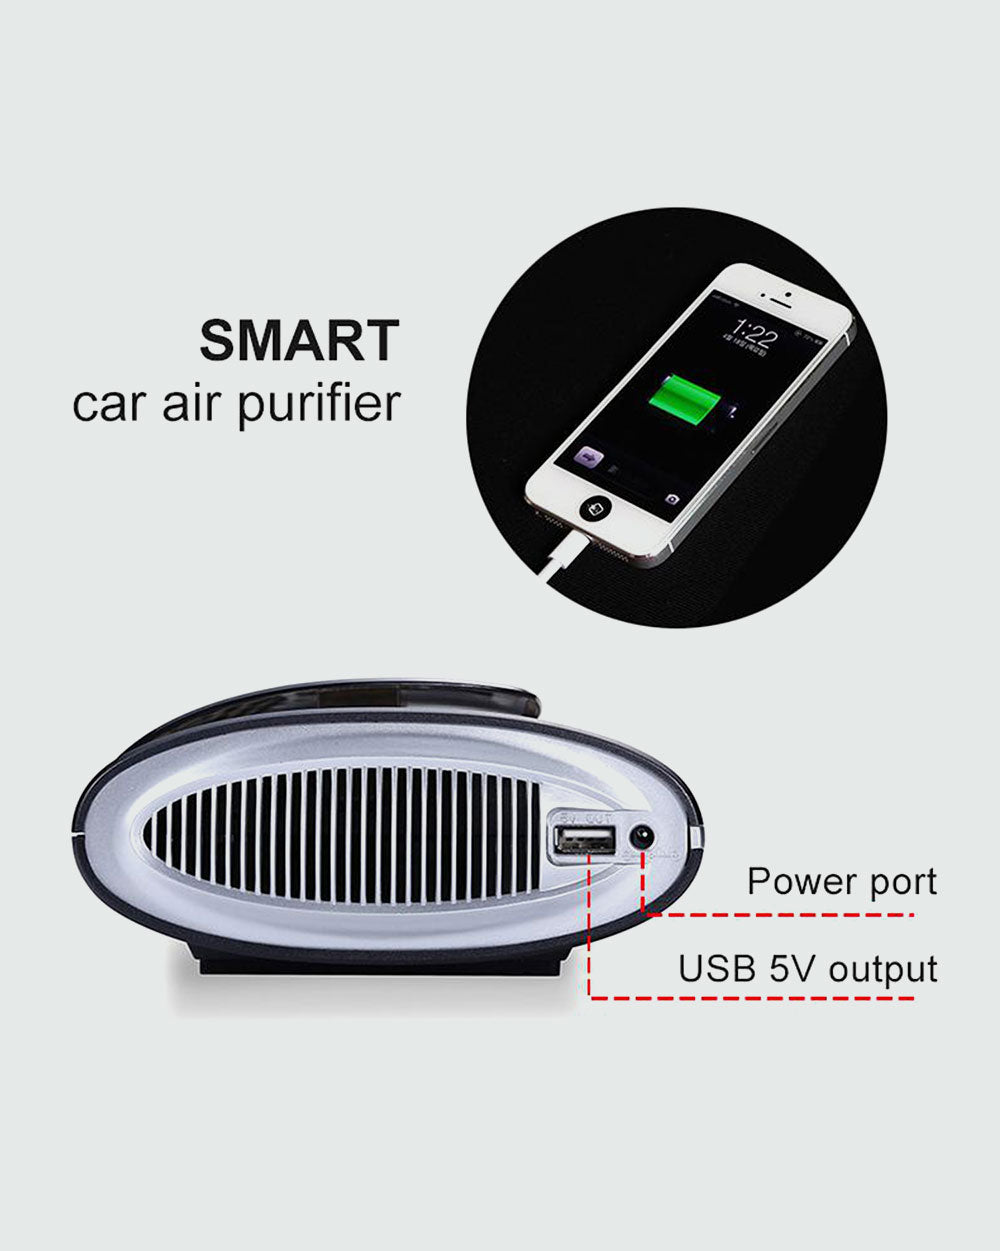 Car Air Purifier with HEPA filter & ionizer, activated carbon filter for clearing odour, Tio2 Nanometer Photocatalyst, USB 5V Output, Power Port